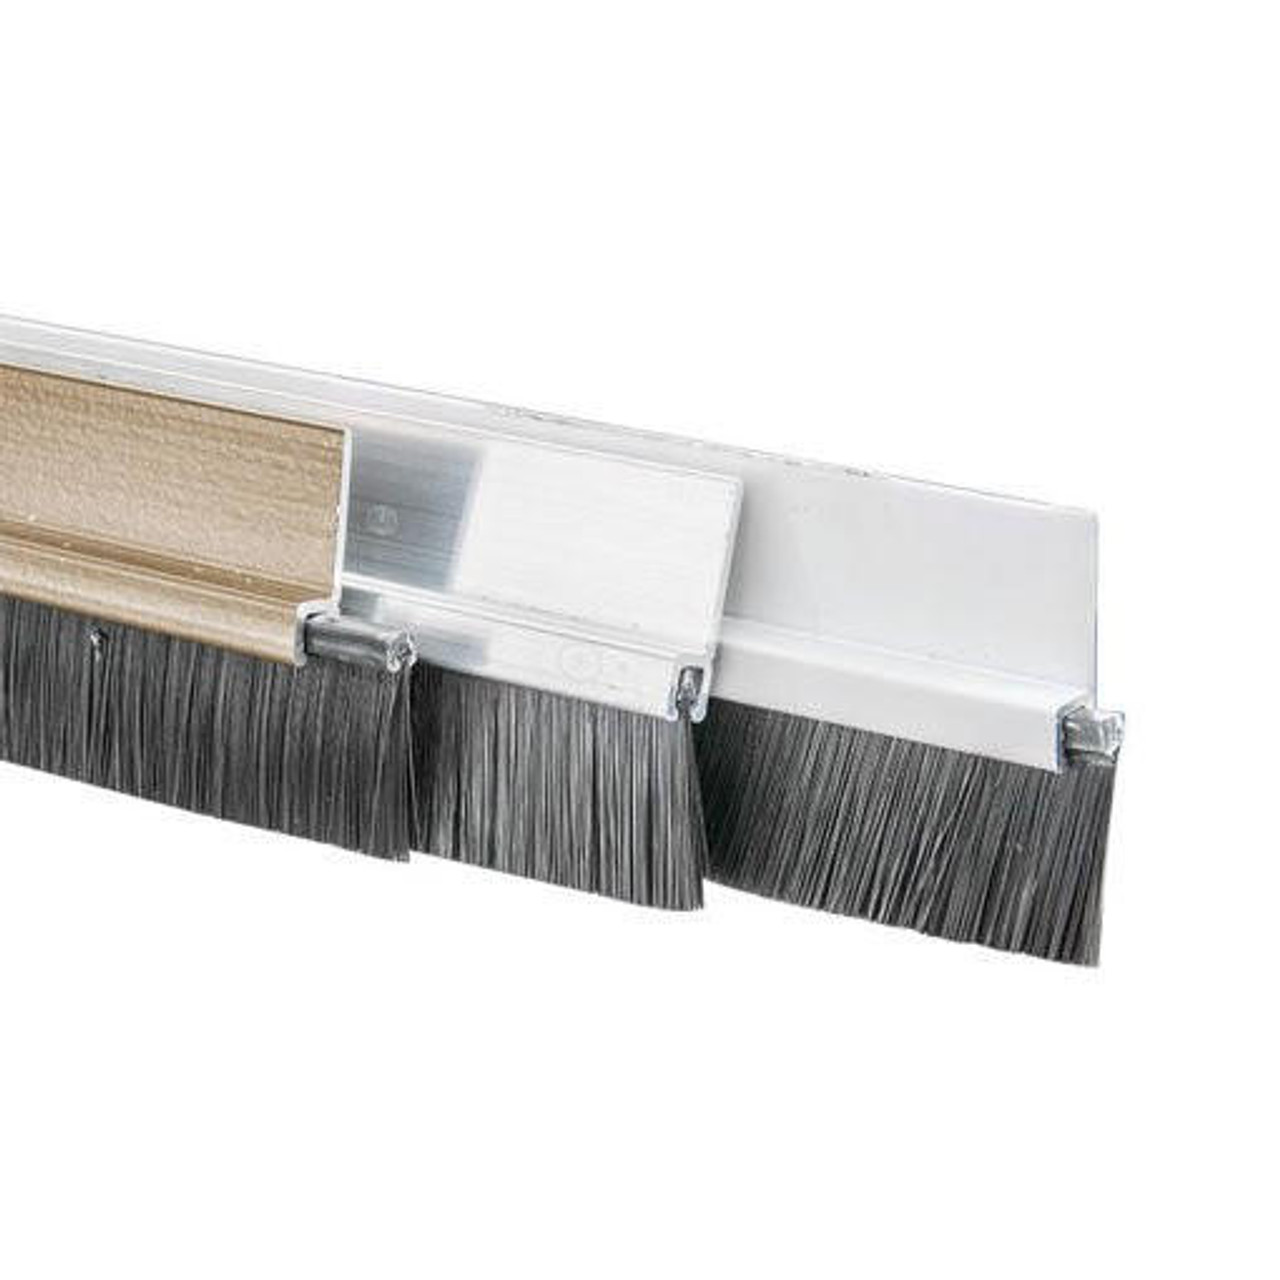 Storm Shield Passage Door Sweep Kits With Brush Seal (3' Wide or 4' Wide) 